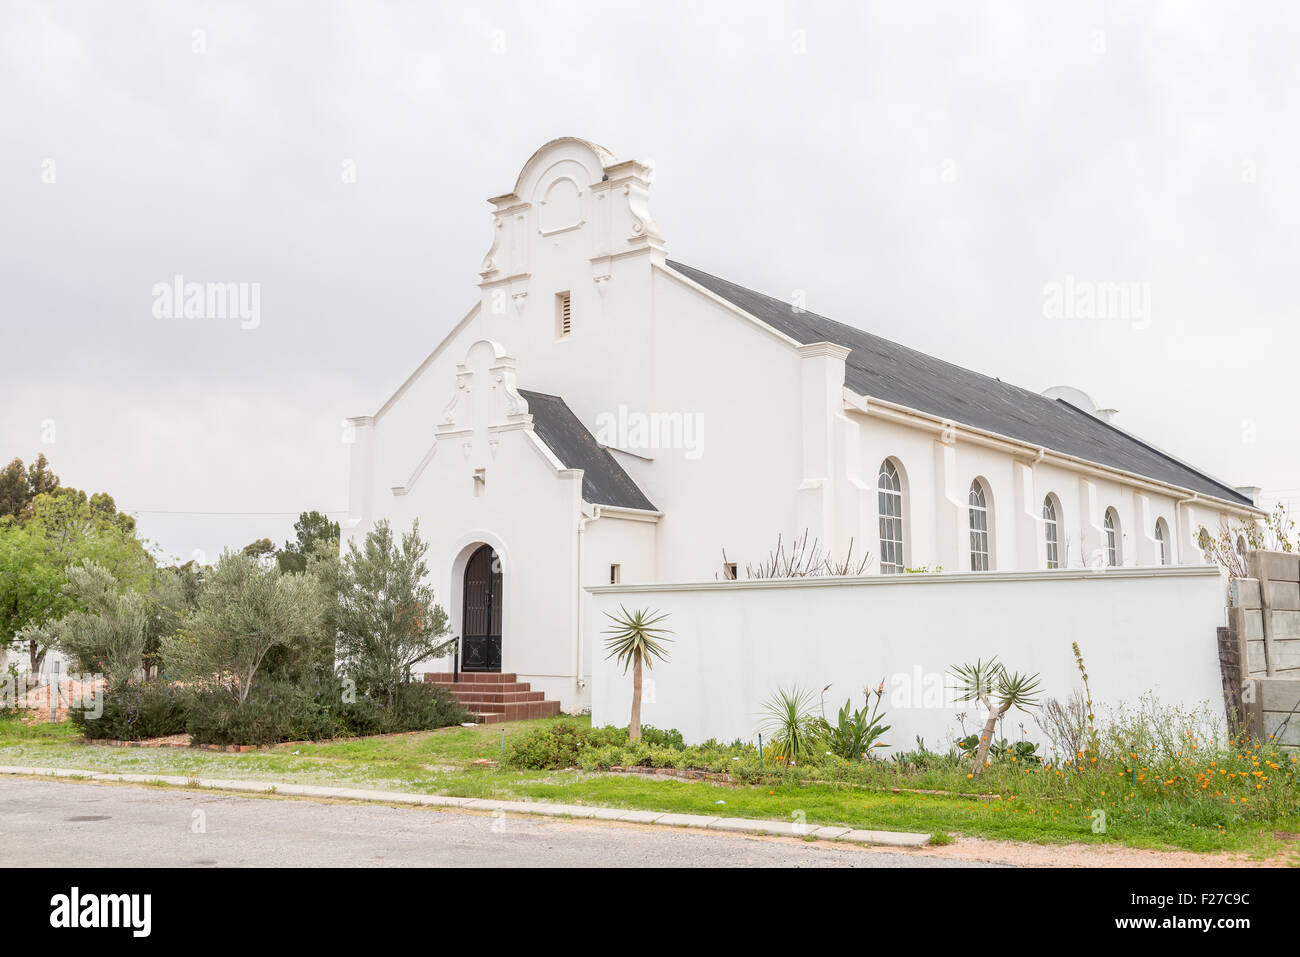 VANRHYNSDORP, SOUTH AFRICA - AUGUST 12, 2015: The historic mission church in Vanrhynsdorp was built in 1931 Stock Photo